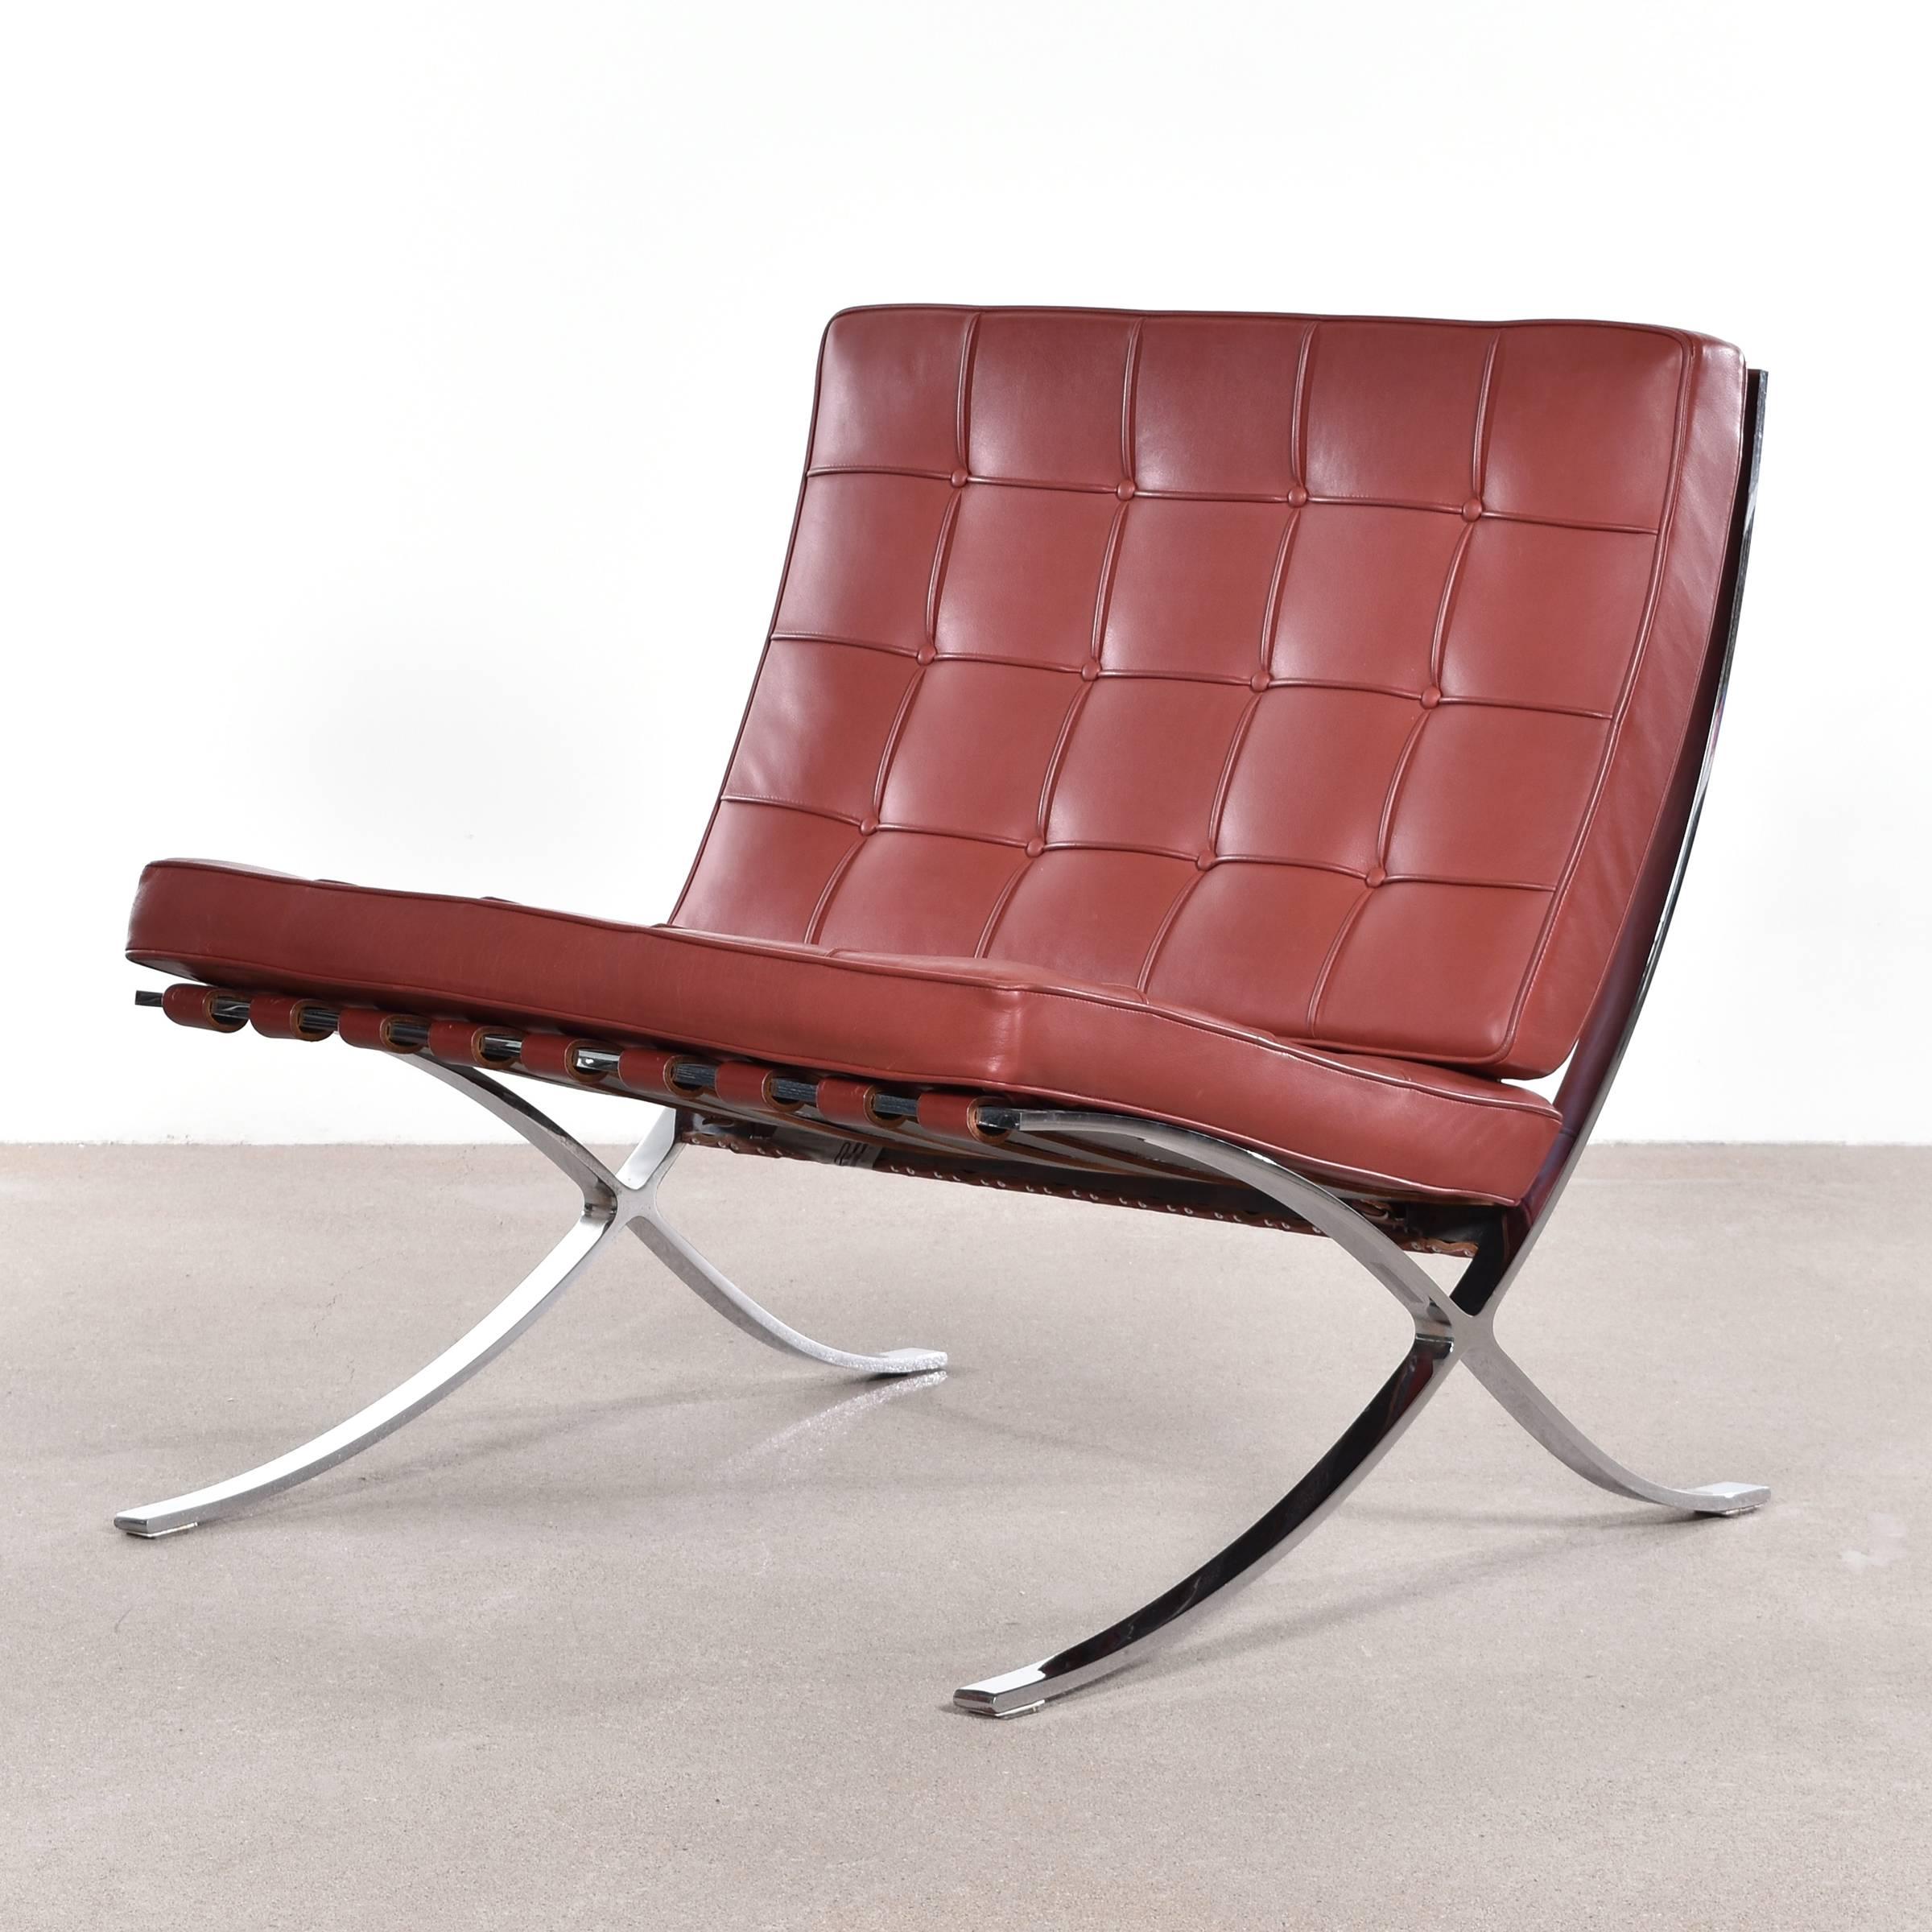 Mid-Century Modern Barcelona Chair by Ludwig Mies van der Rohe for Knoll